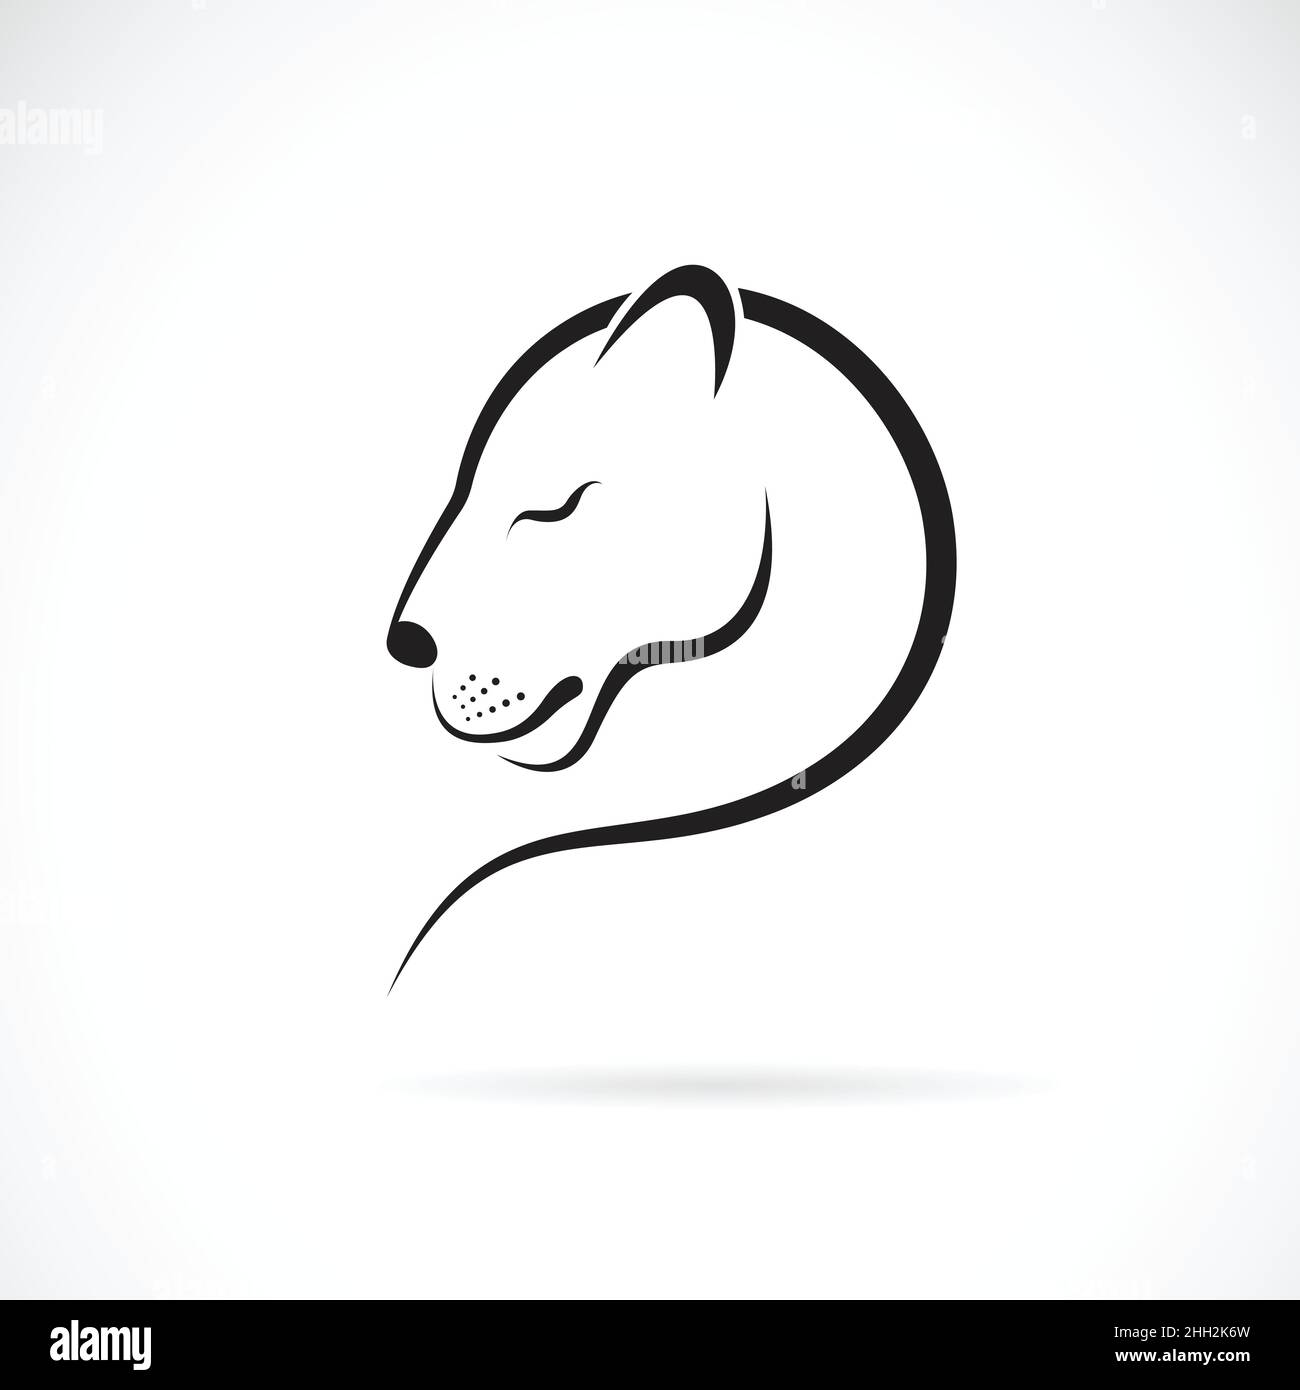 Vector of female lion design on white background. Wild Animals. Female lion logo or icon. Easy editable layered vector illustration. Stock Vector